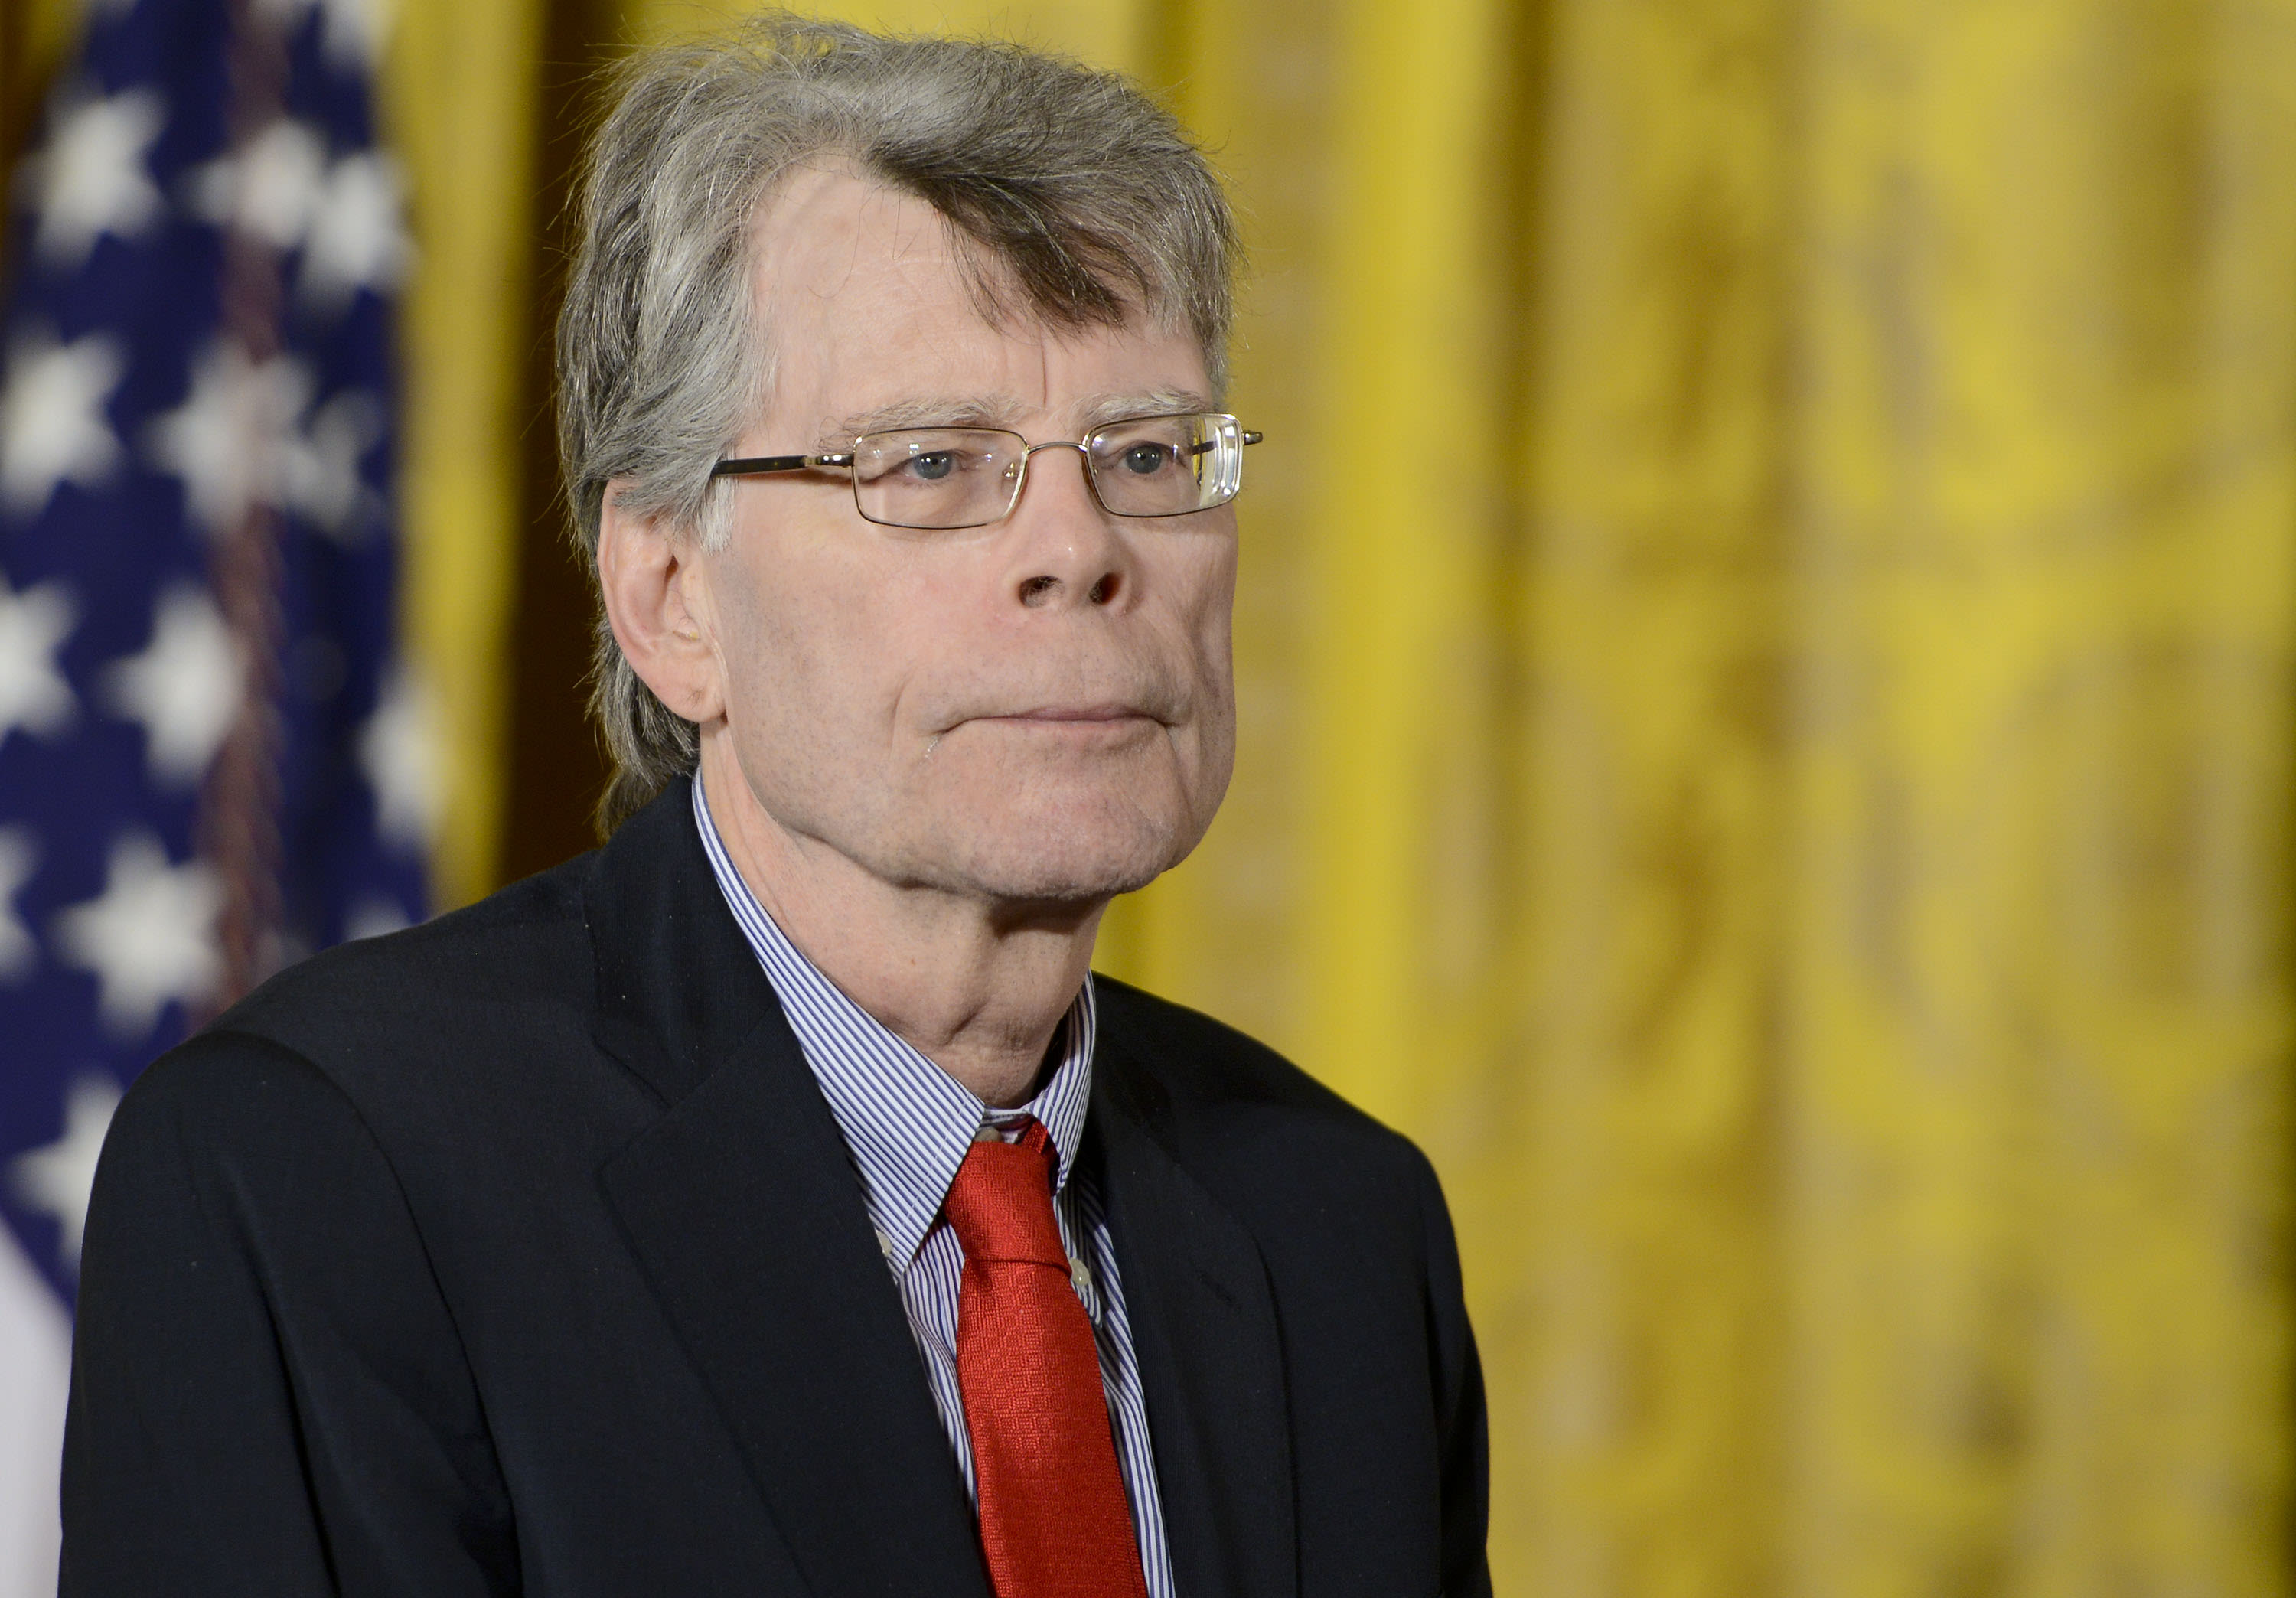 Stephen King's Donald Trump comment goes viral